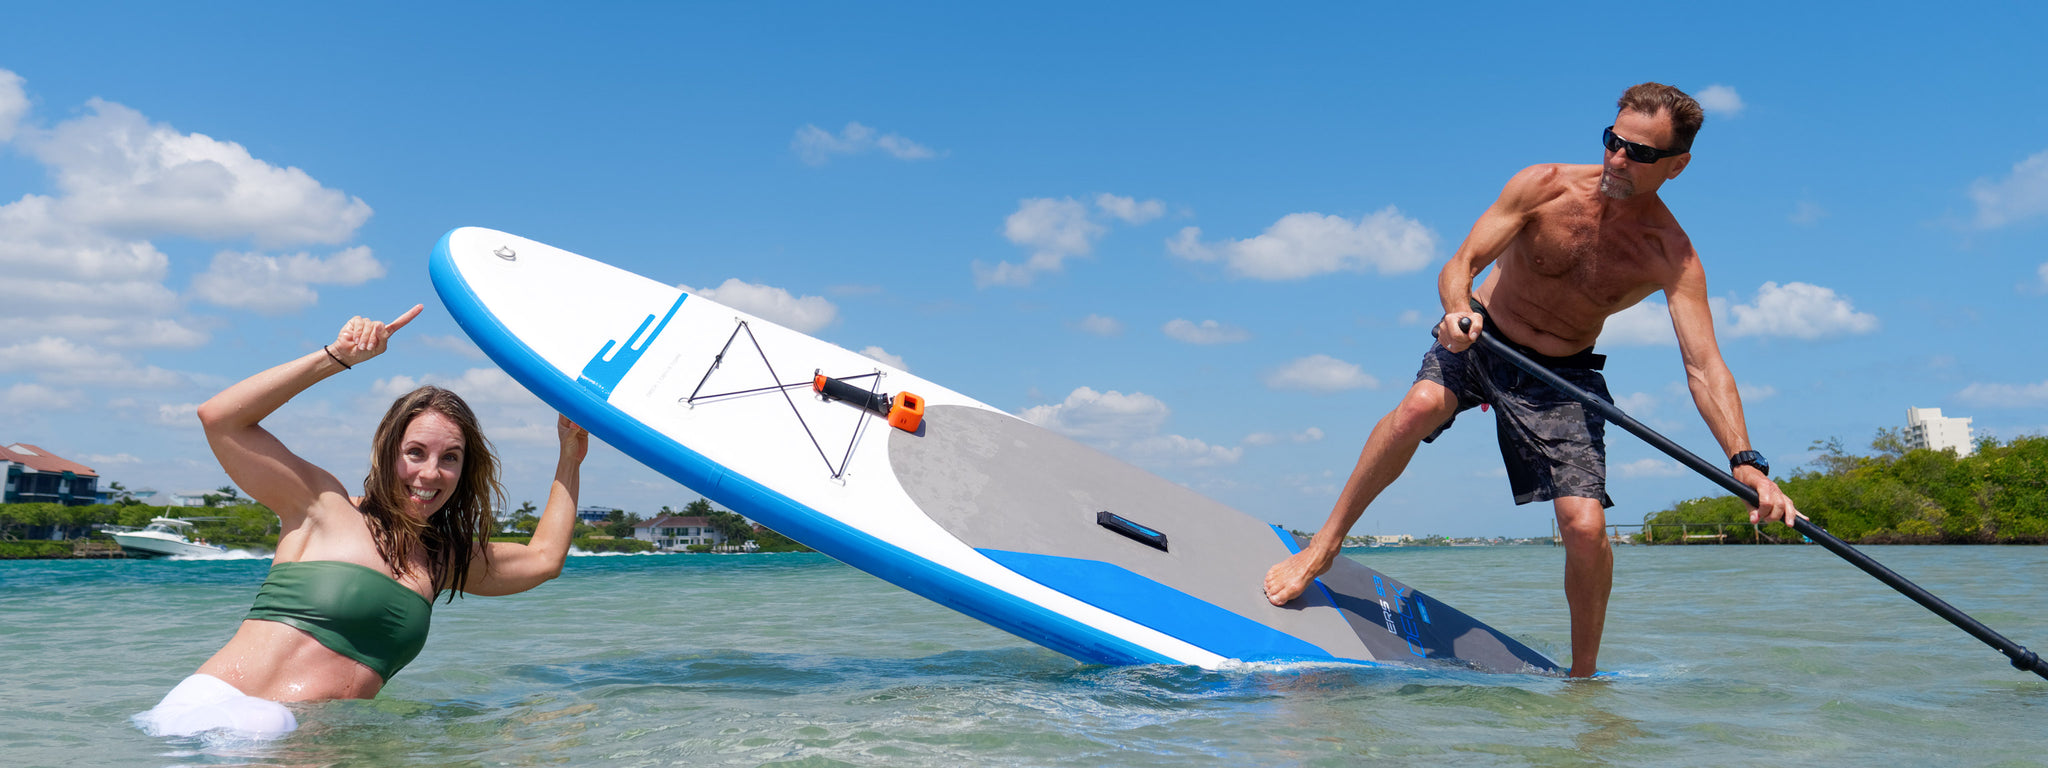 Buying your first inflatable SUP, Things to look out for